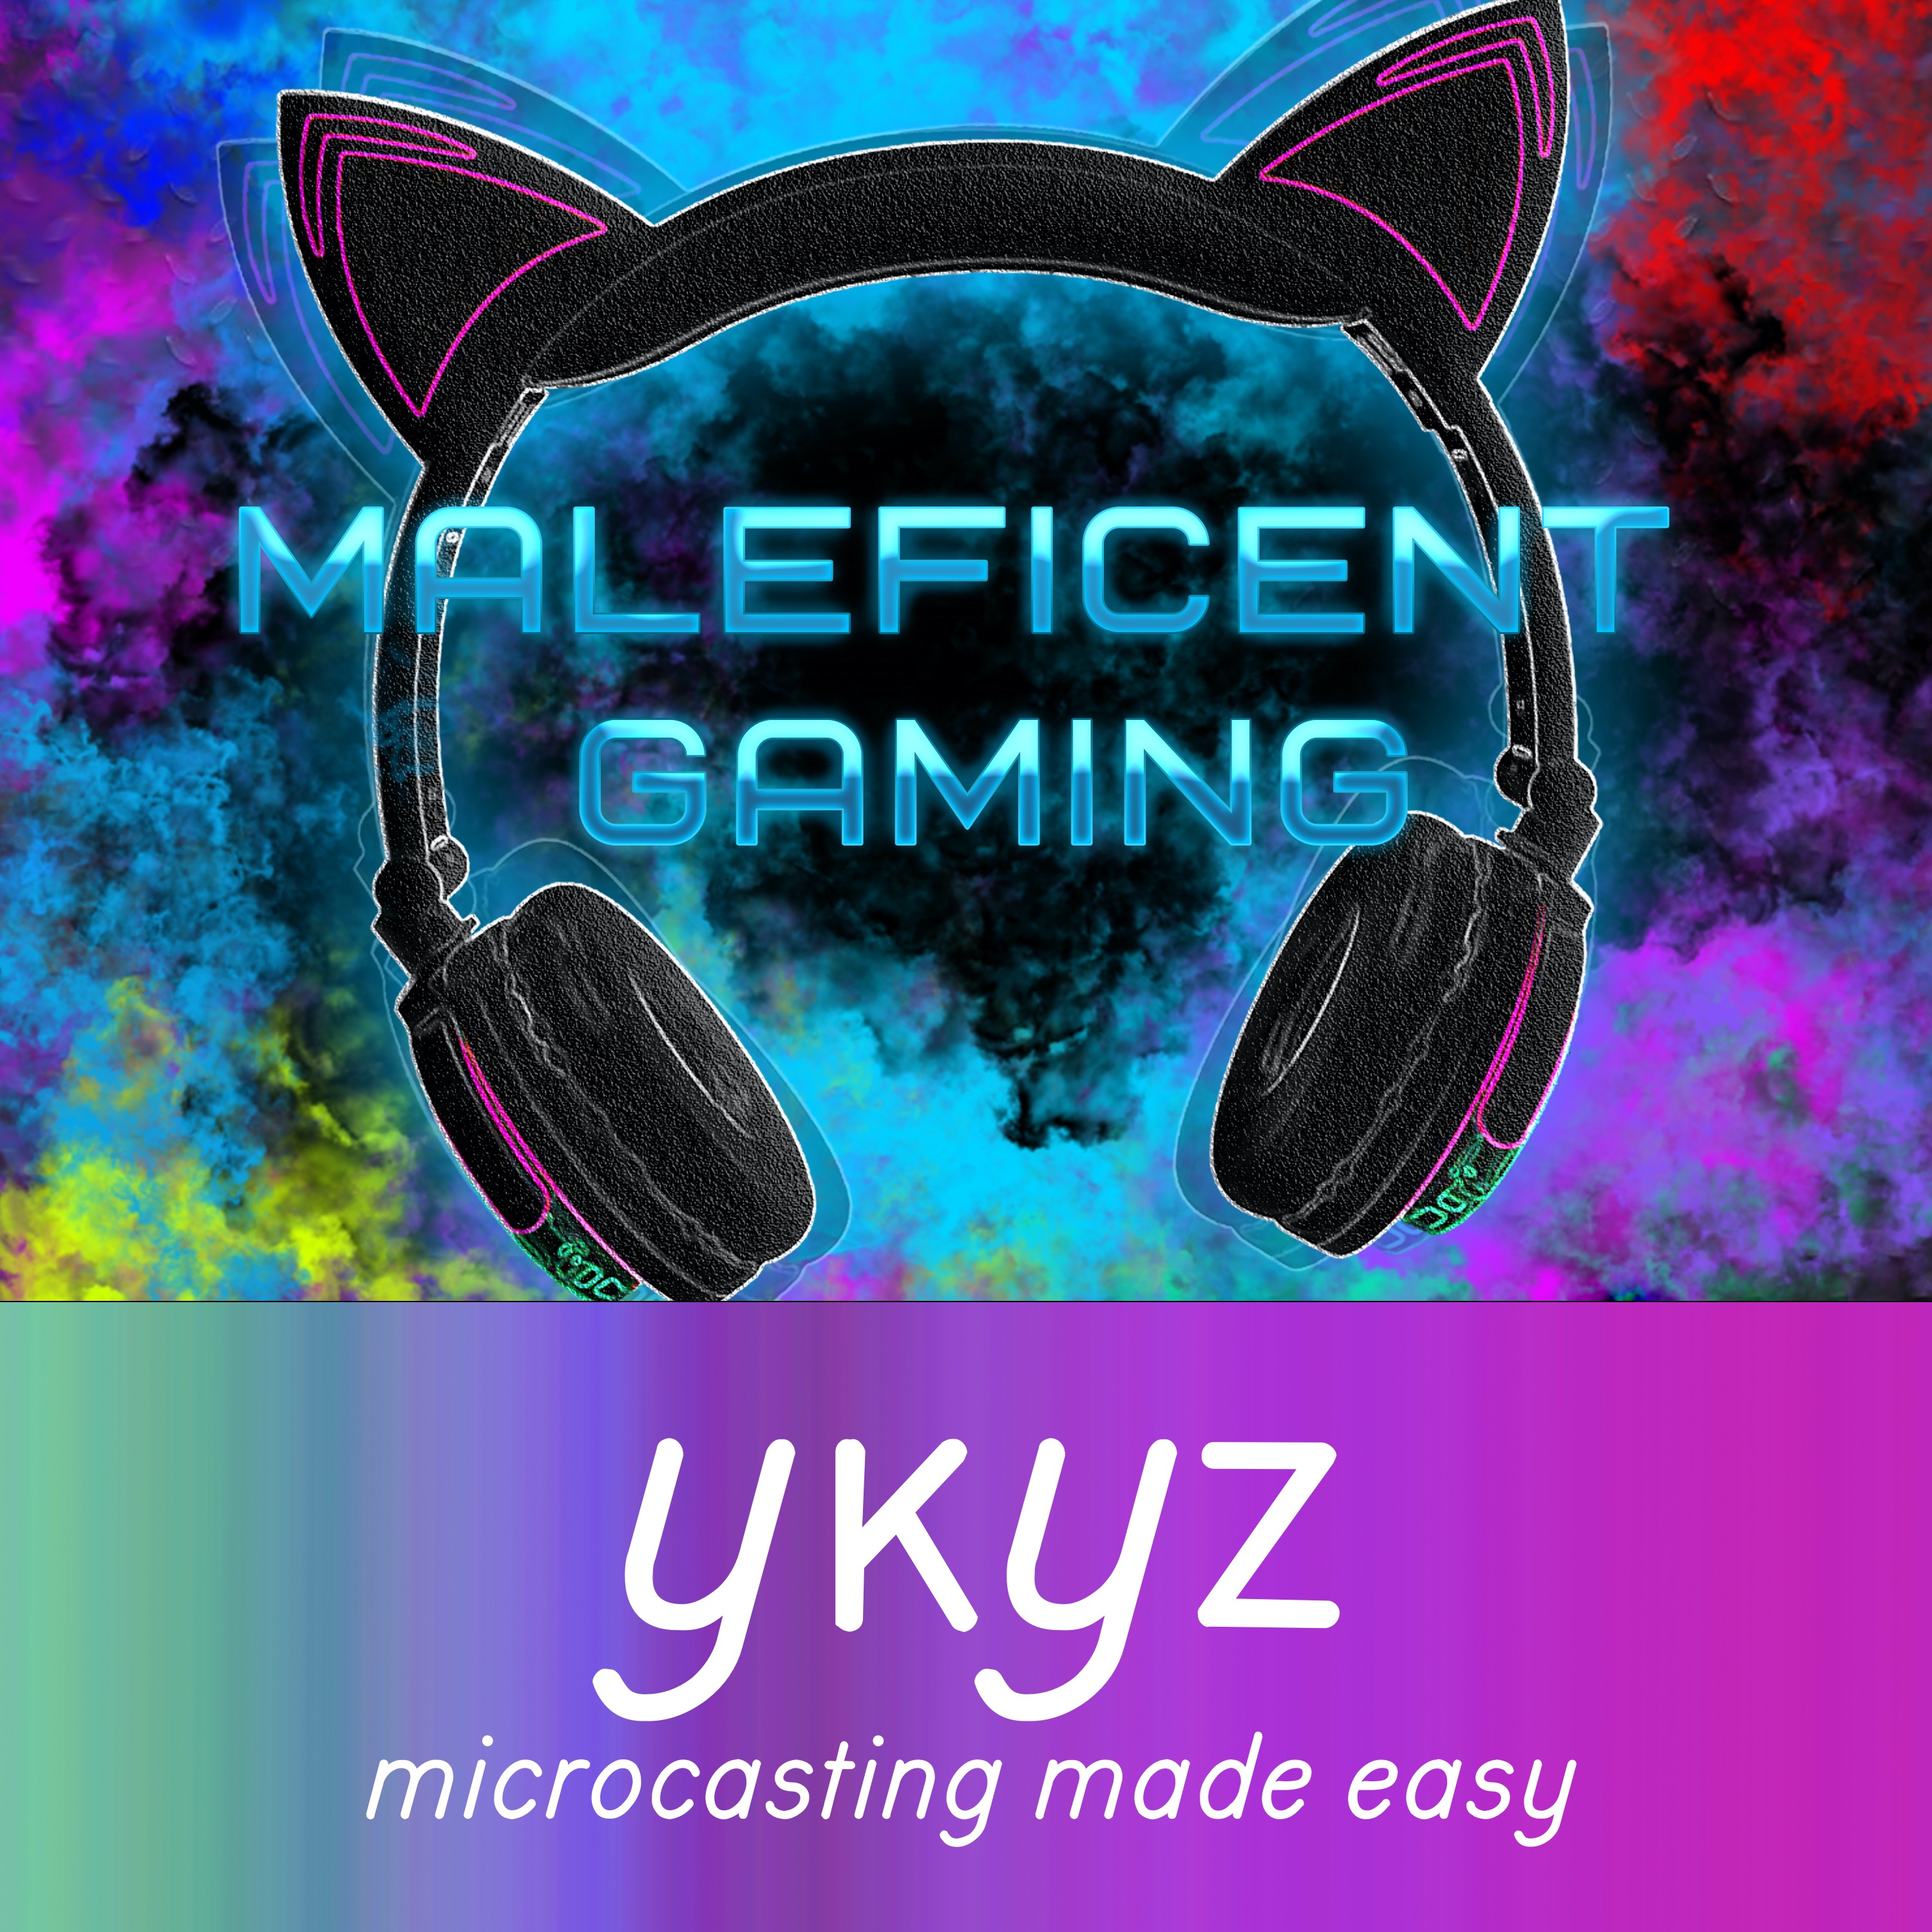 Maleficent Gaming microcast